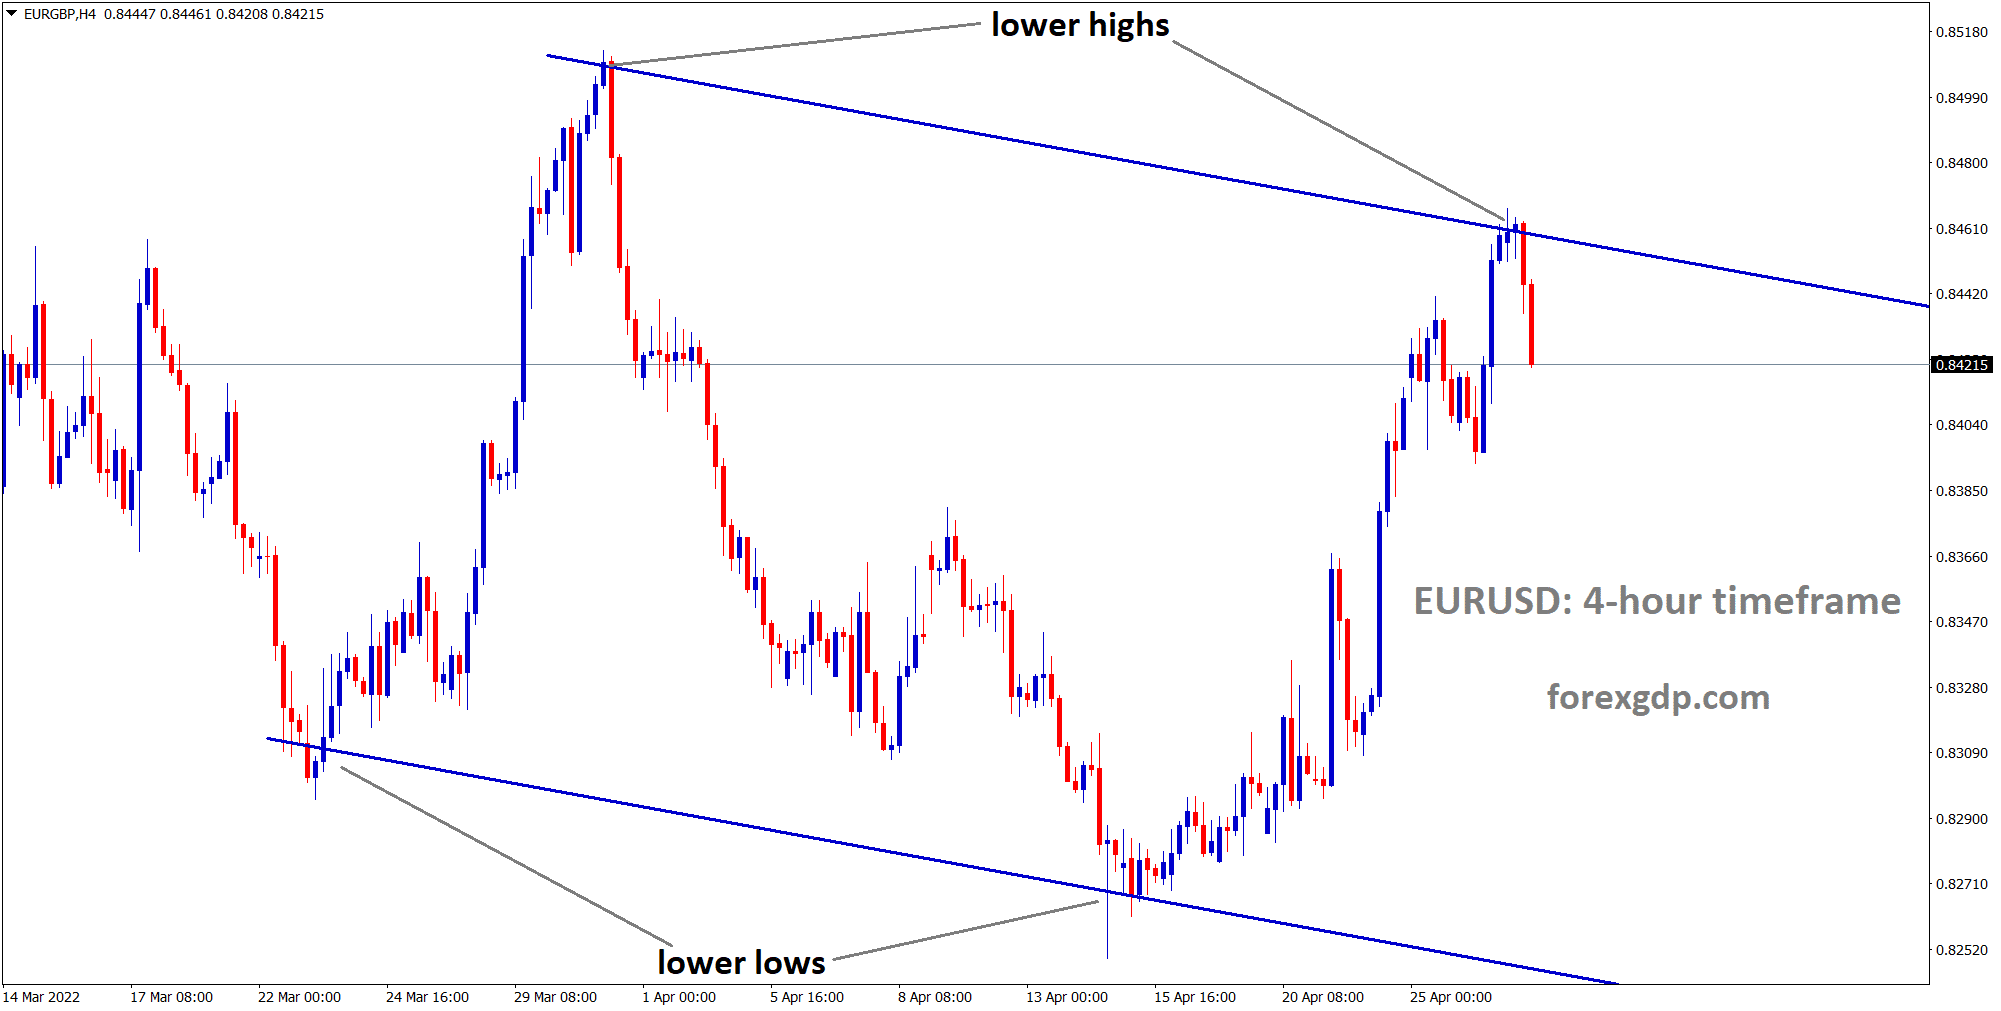 EURGBP 4 Hour market has reached the lower high area of the descending channel.